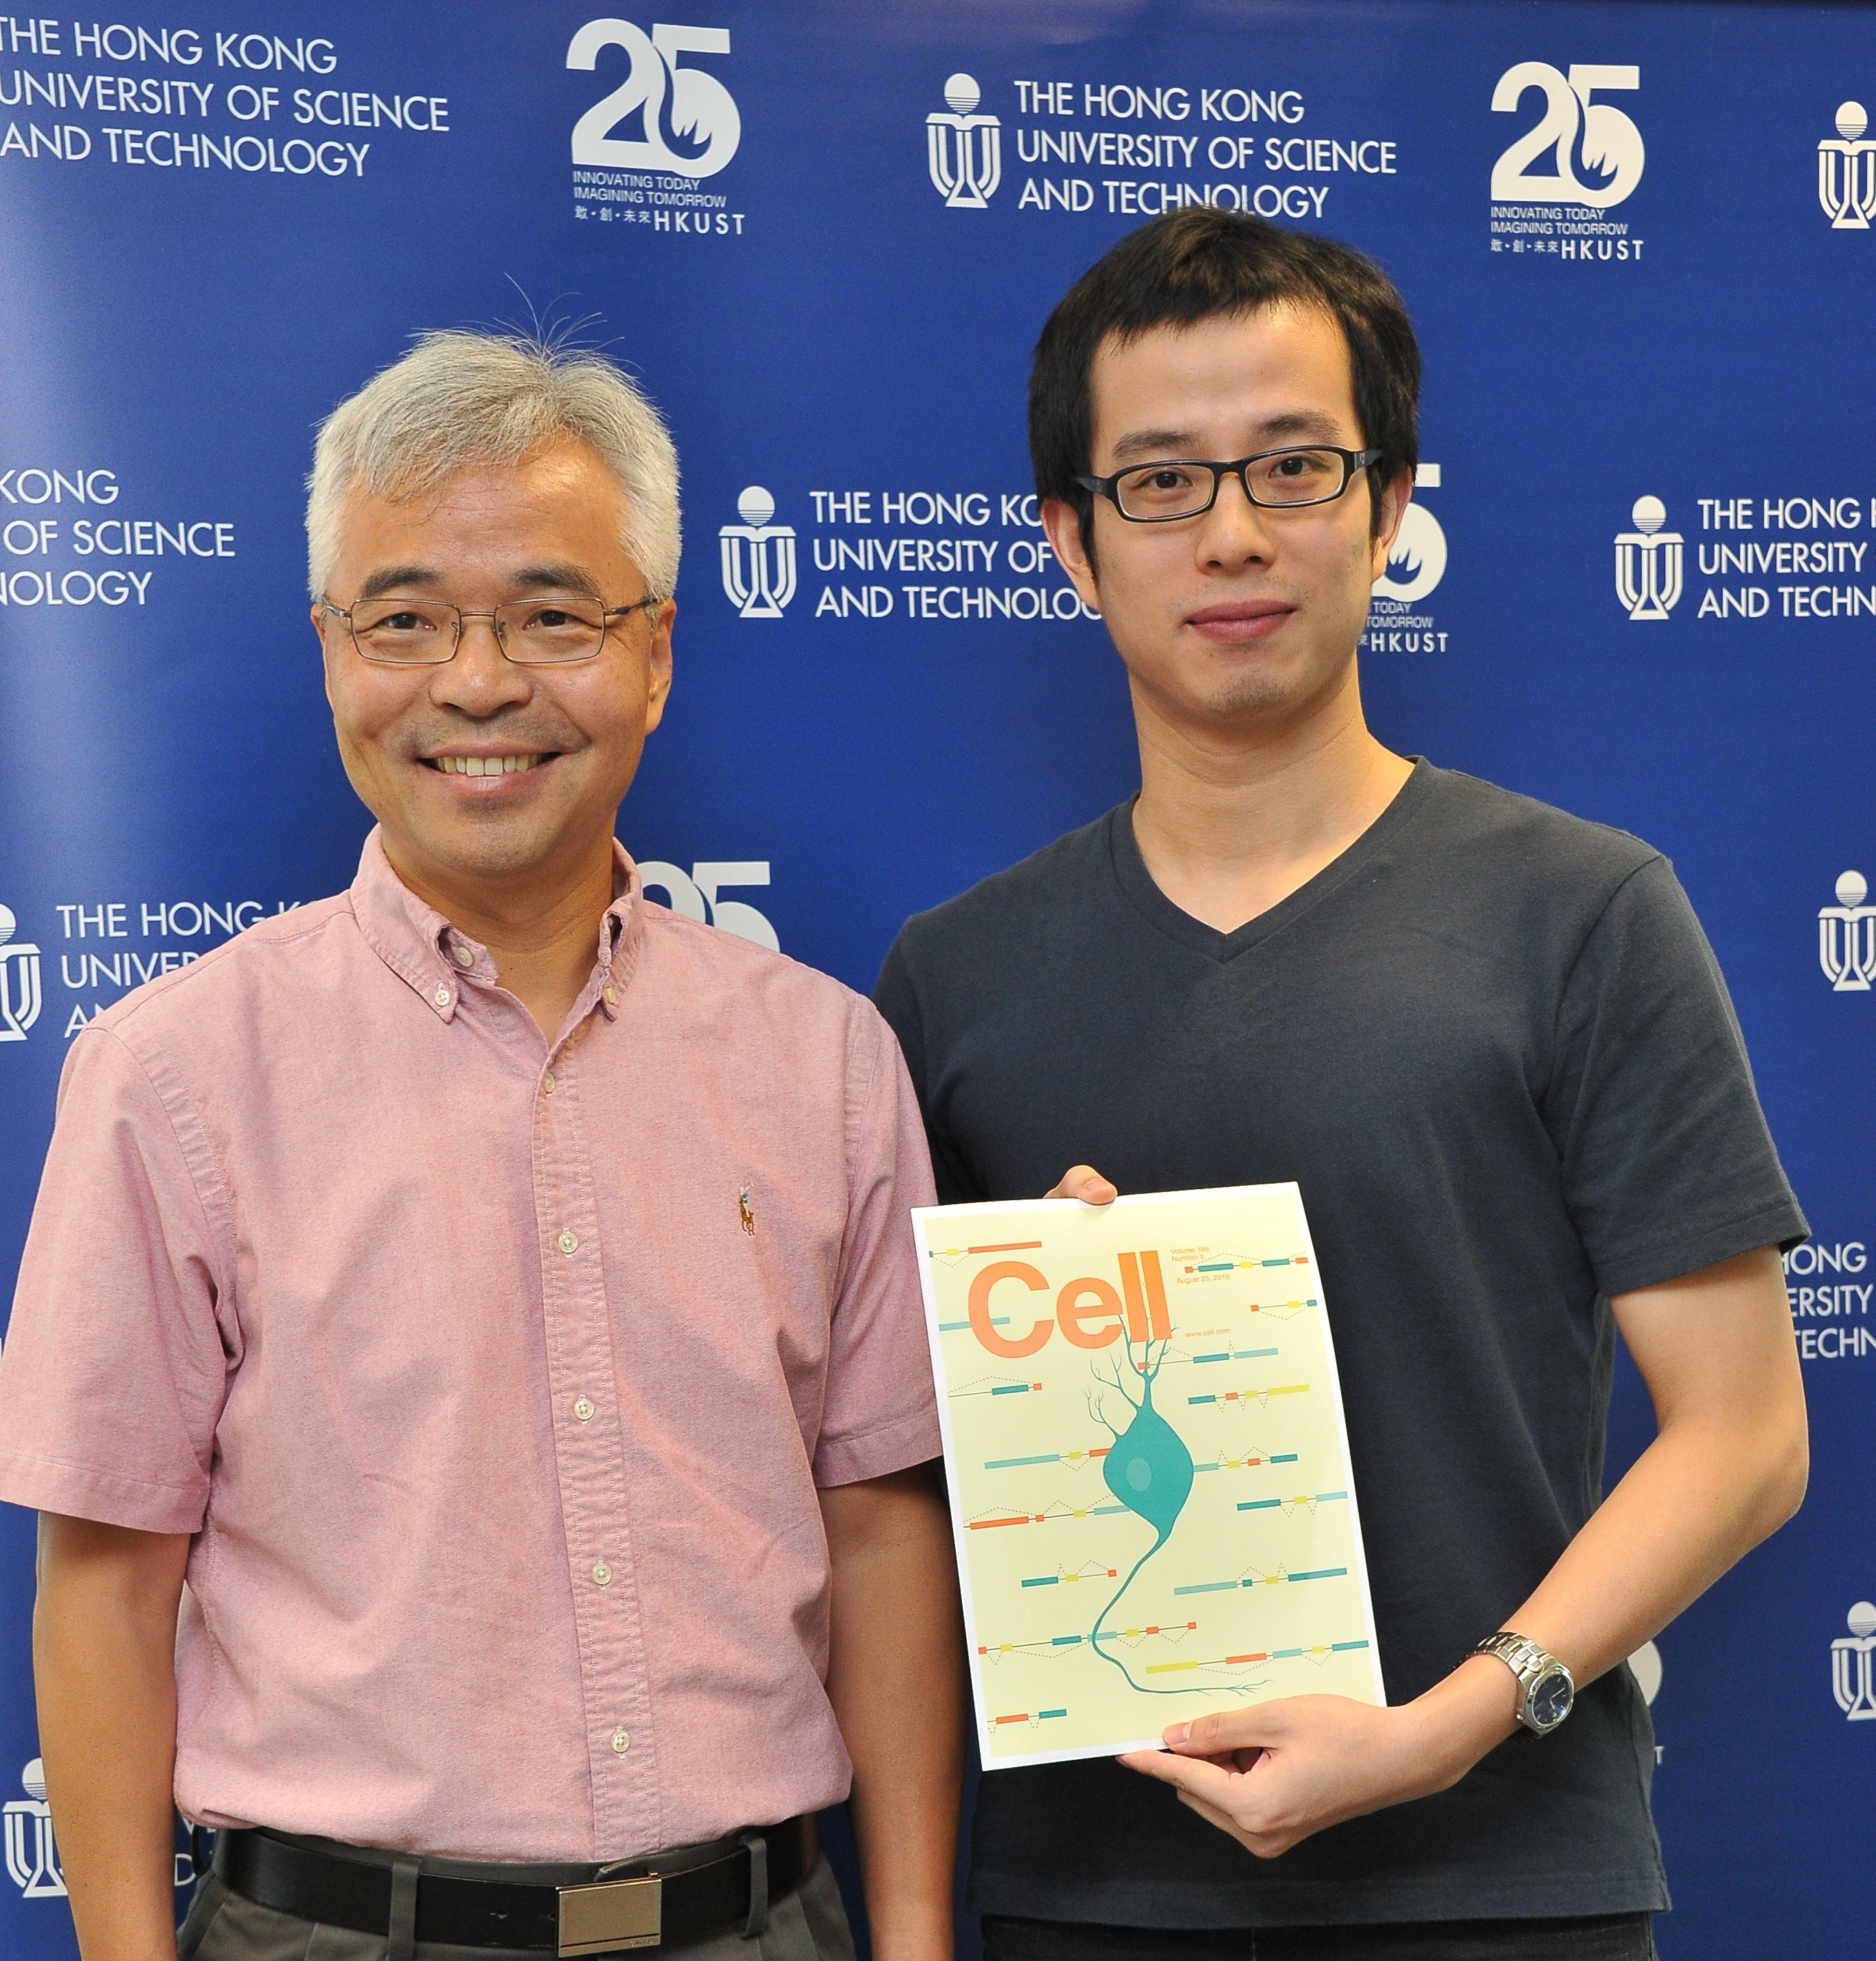 Prof. ZHANG Mingjie and his PhD student Mr. ZENG Menglong with their research paper published in the top scientific journal Cell on August 25, 2016